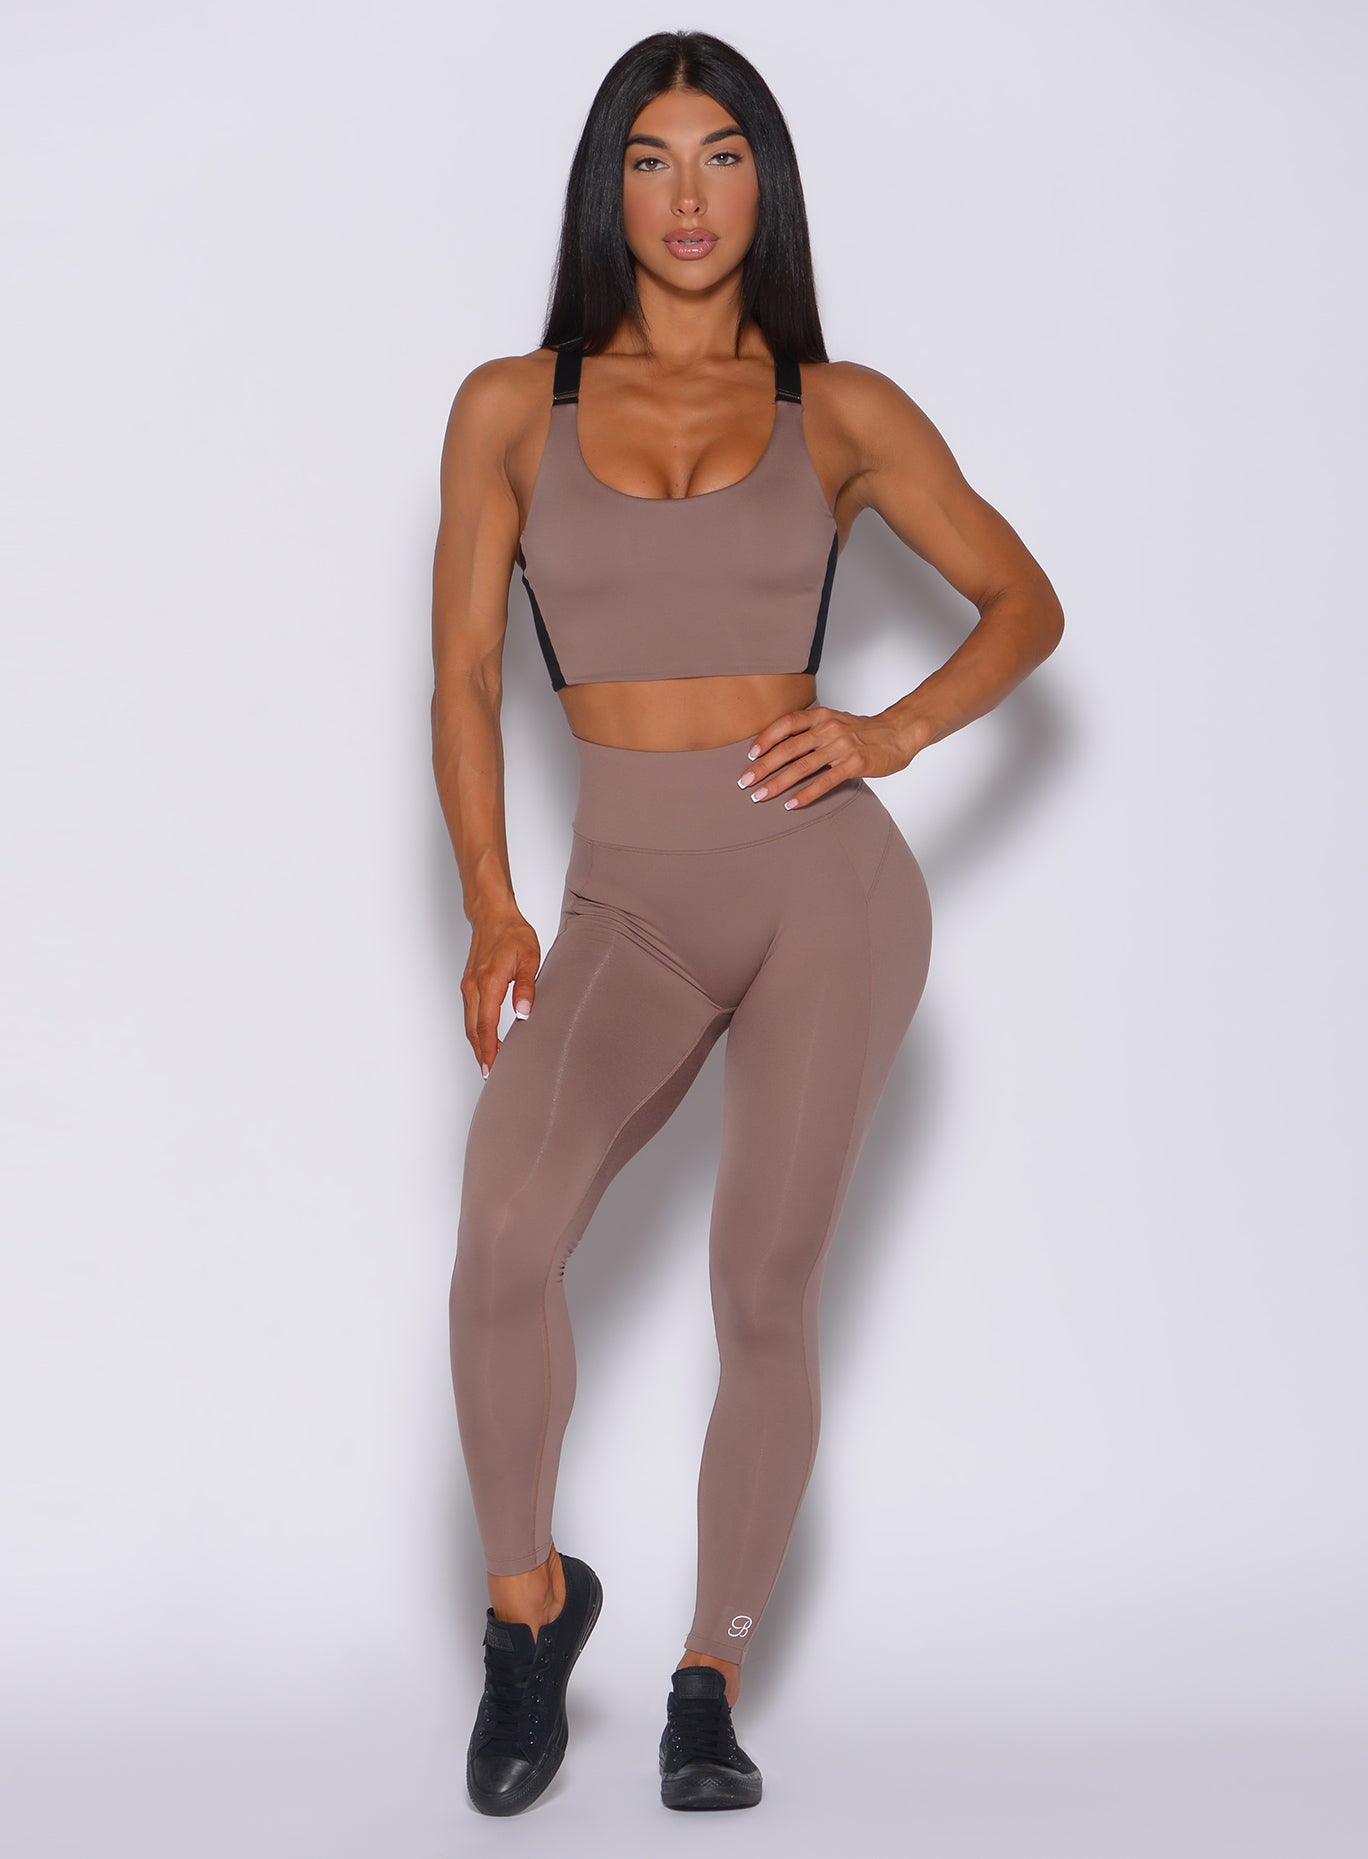 Front profile view of the model wearing our snatched waist leggings in cocoa color and a matching bra